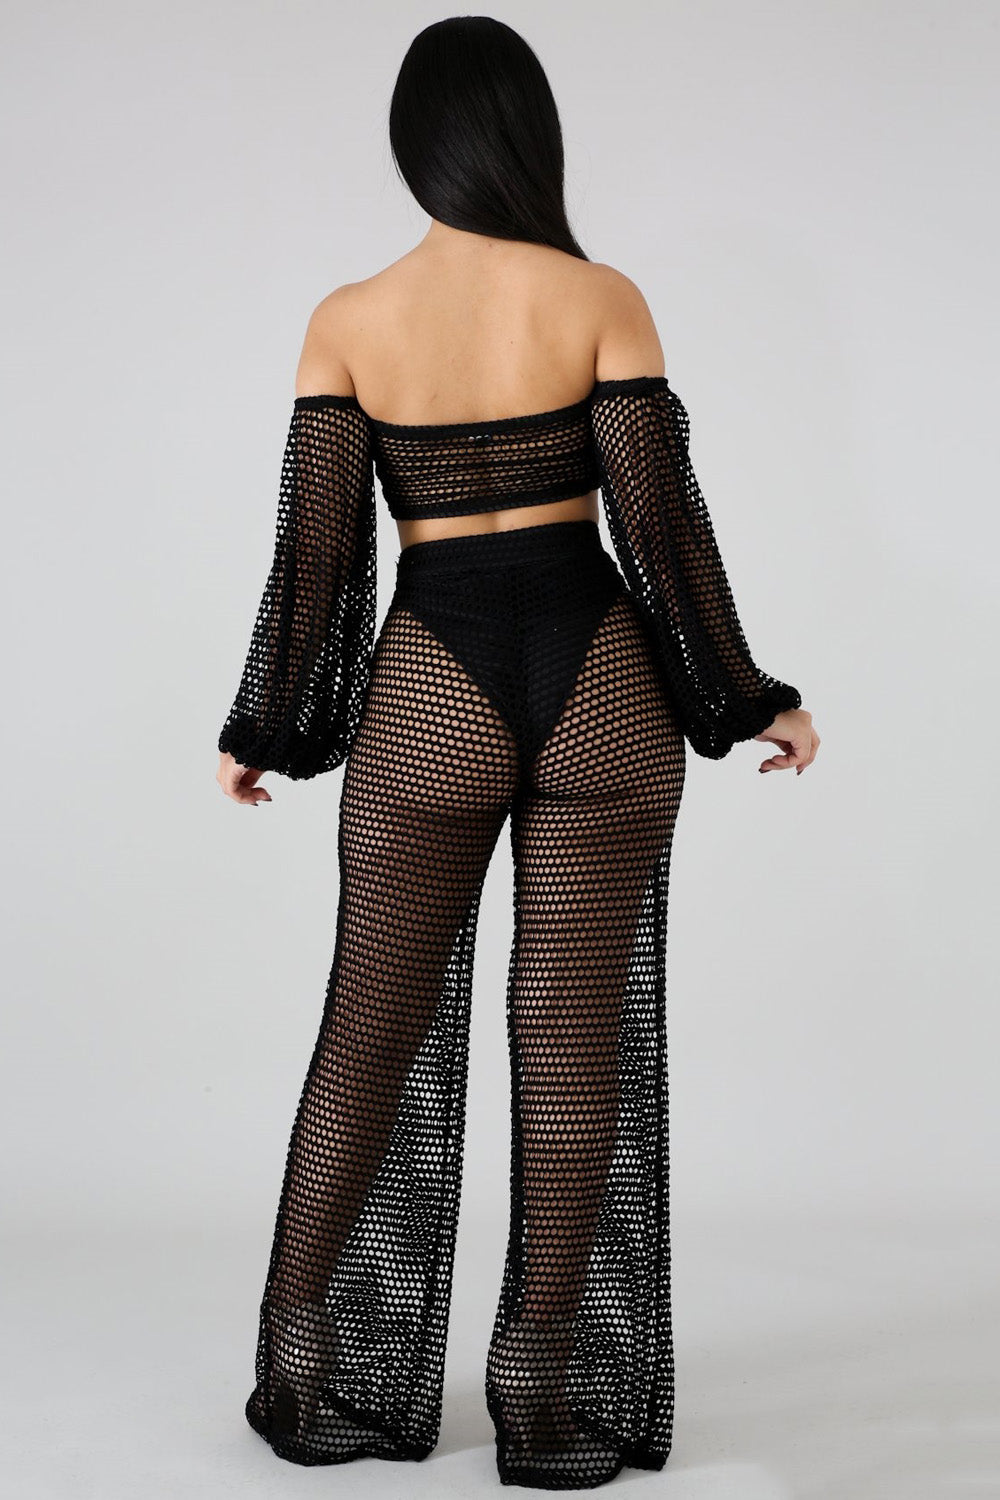 goPals black 2-piece mesh set with tie front top and wide leg pants.